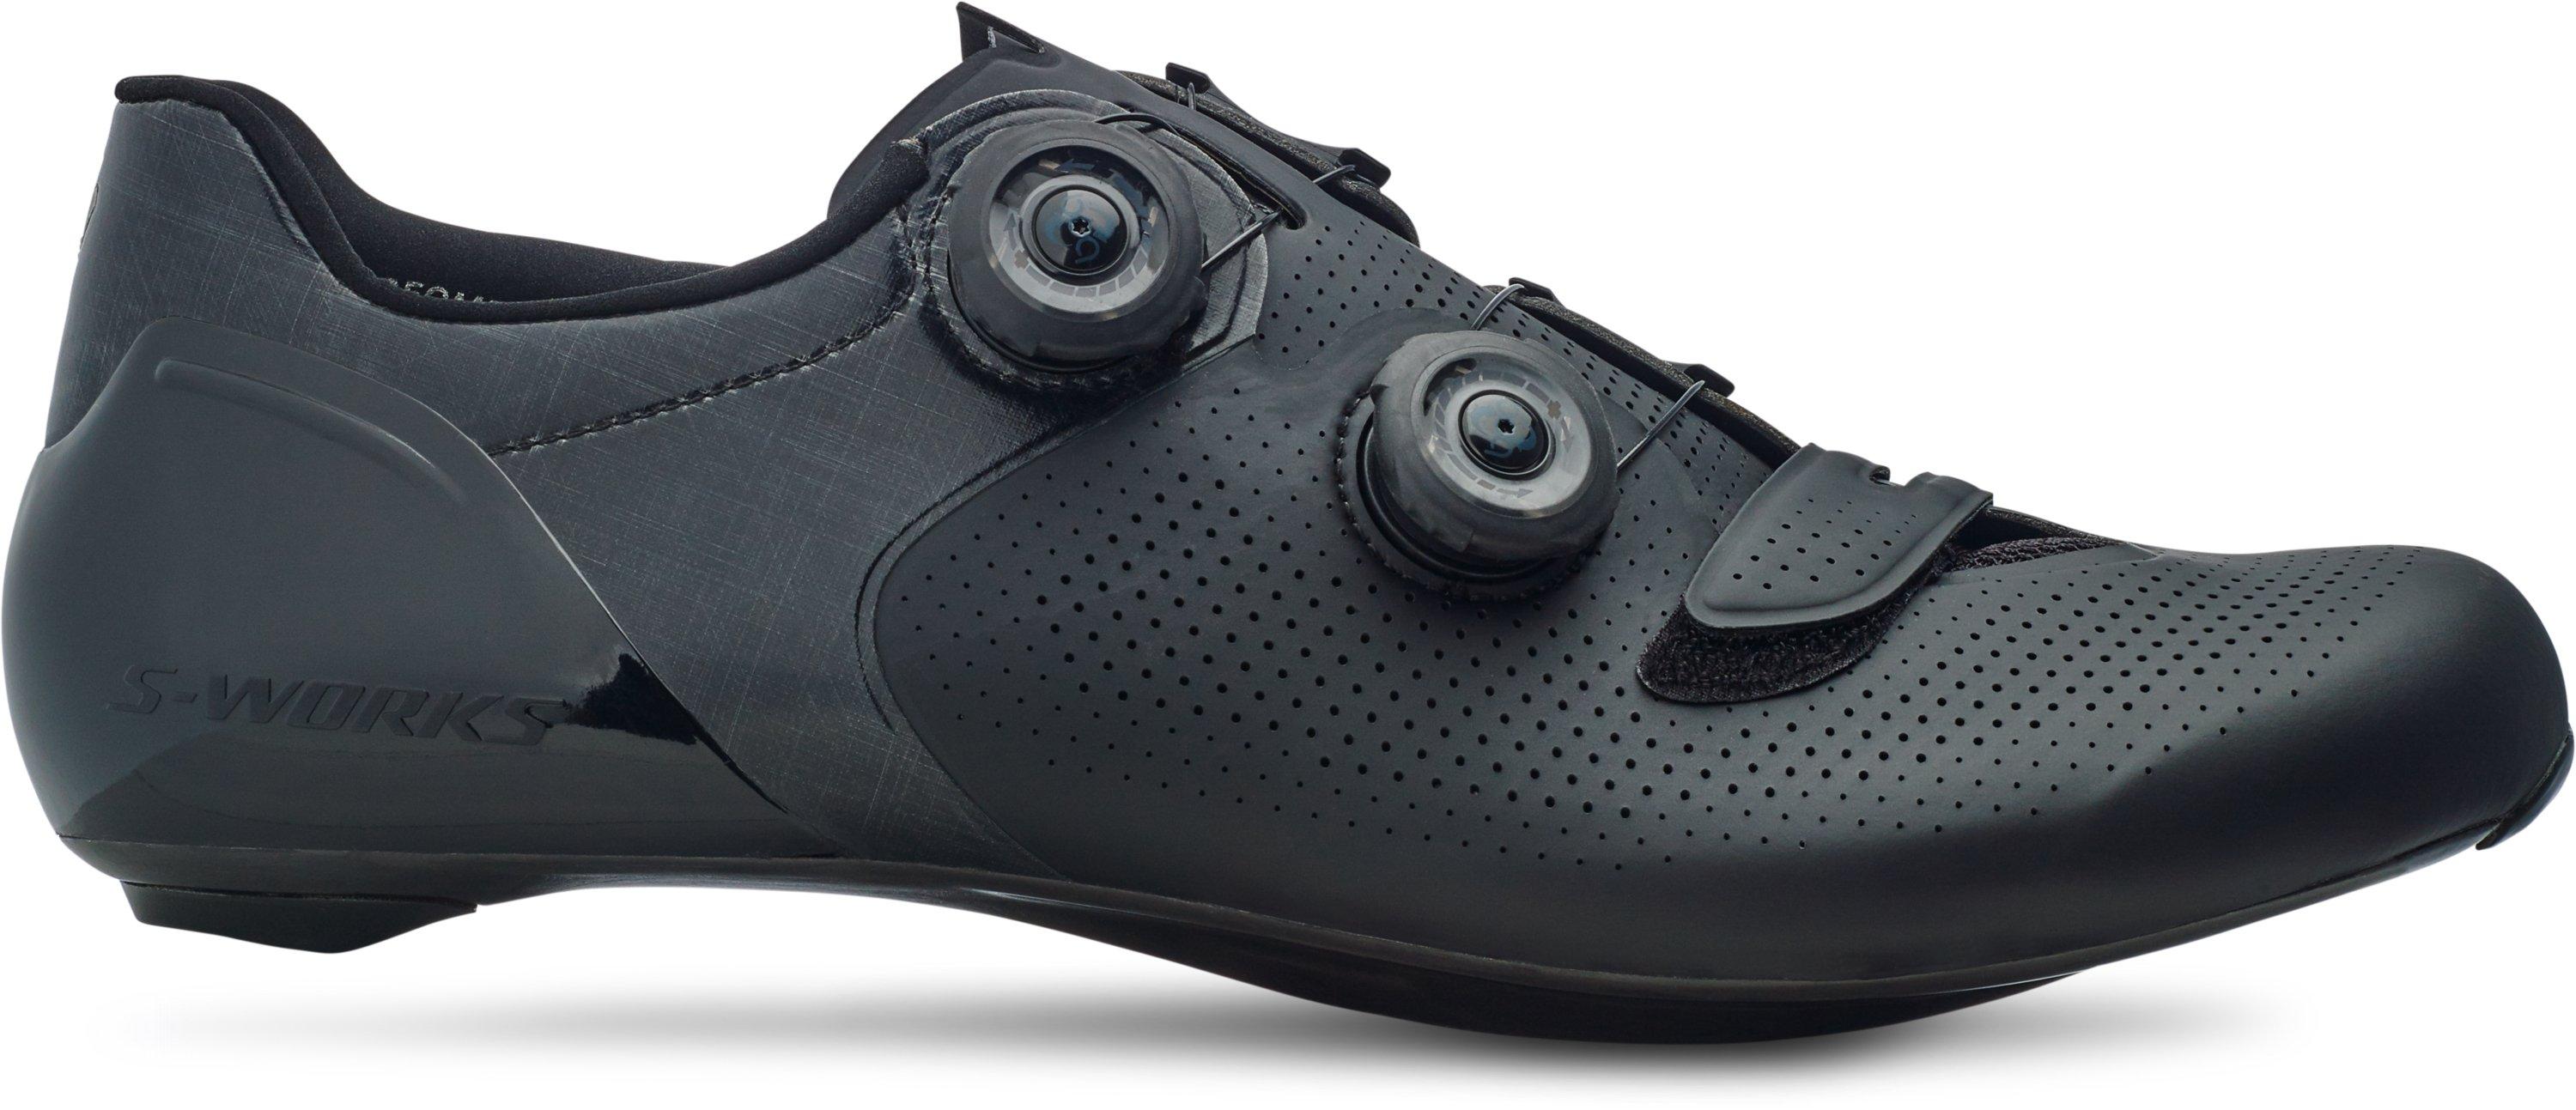 S-Works 6 Road Shoes